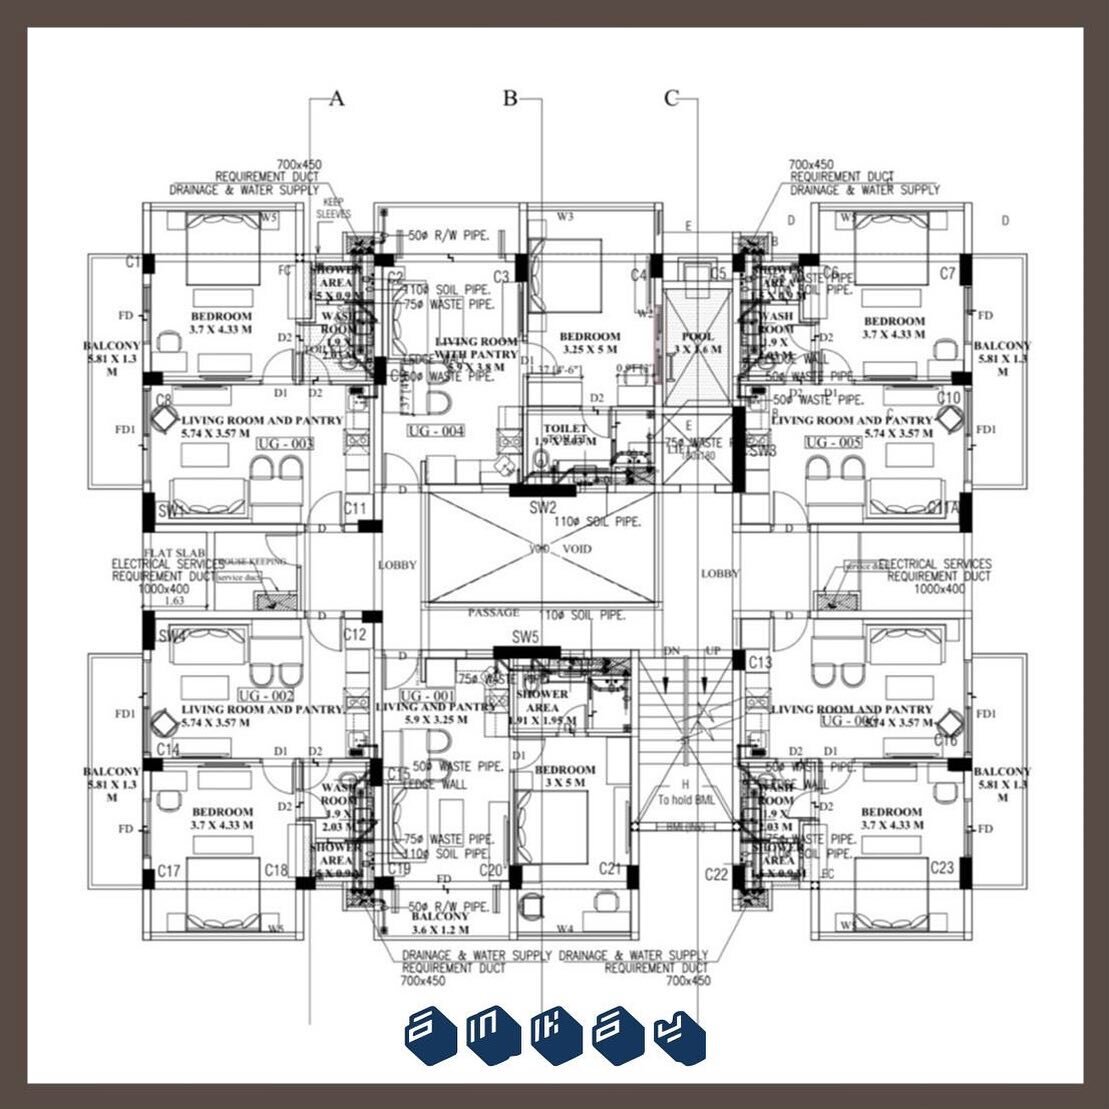 Rooms &amp; Suites // ANKAY_Goa Calangute Hotel Project 2021 // sneak peak into Layers of technical drawings for different floor plates of this on-going 90 Room Property.
.....
#HospitalityDesign #HotelRooms #HotelSuites #HotelsandResorts #technicald